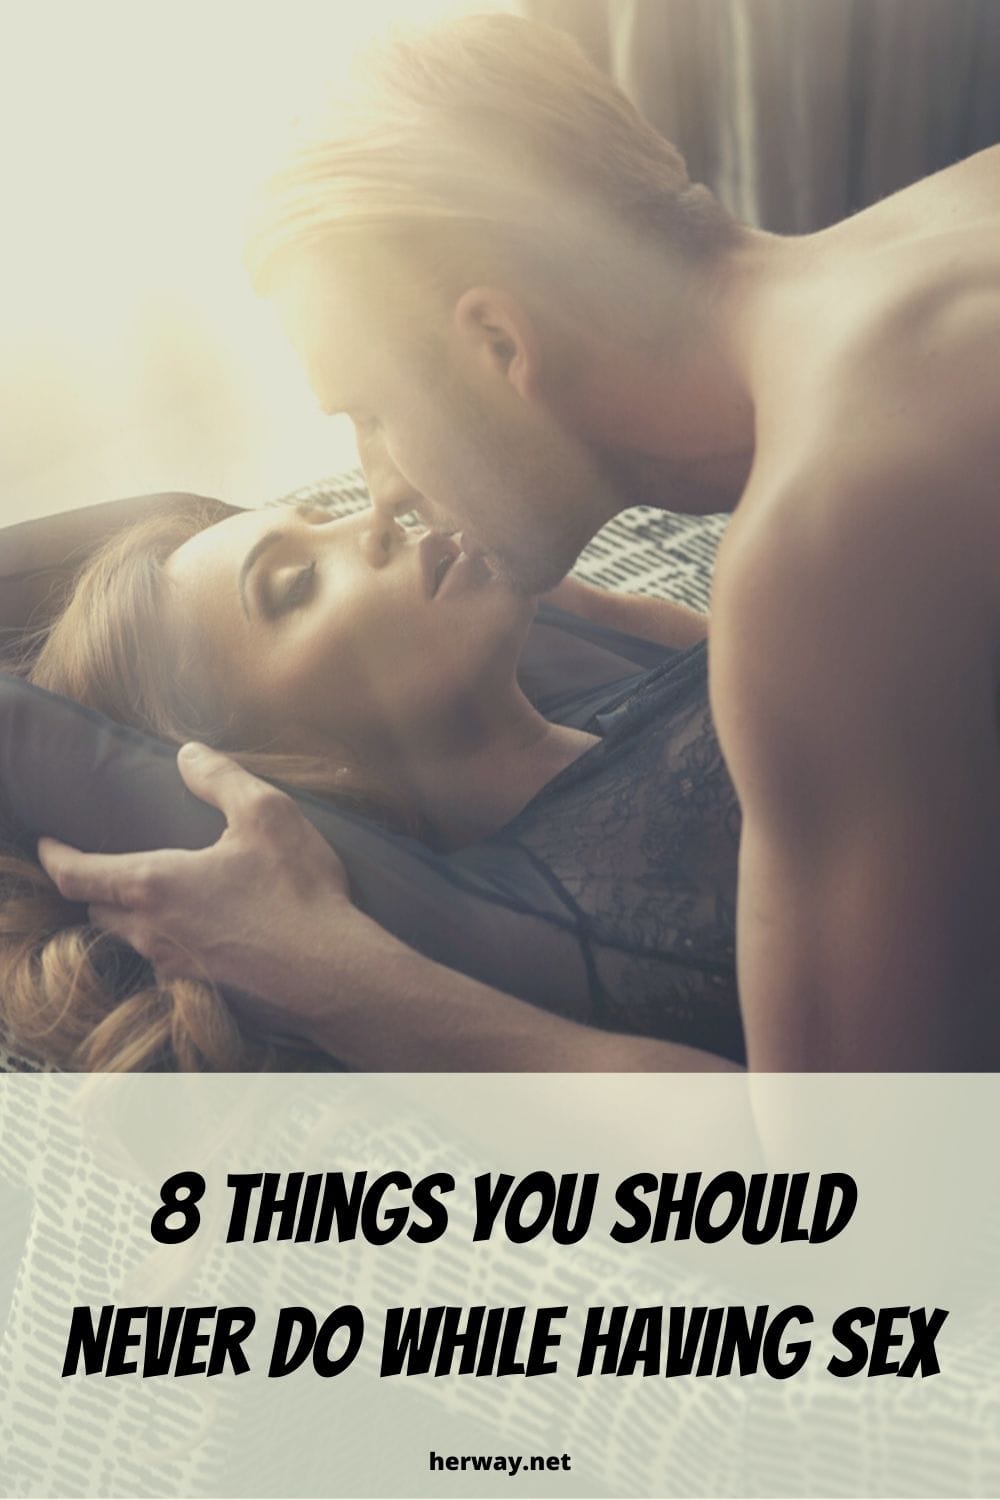 8 Things You Should Never Do While Having Sex